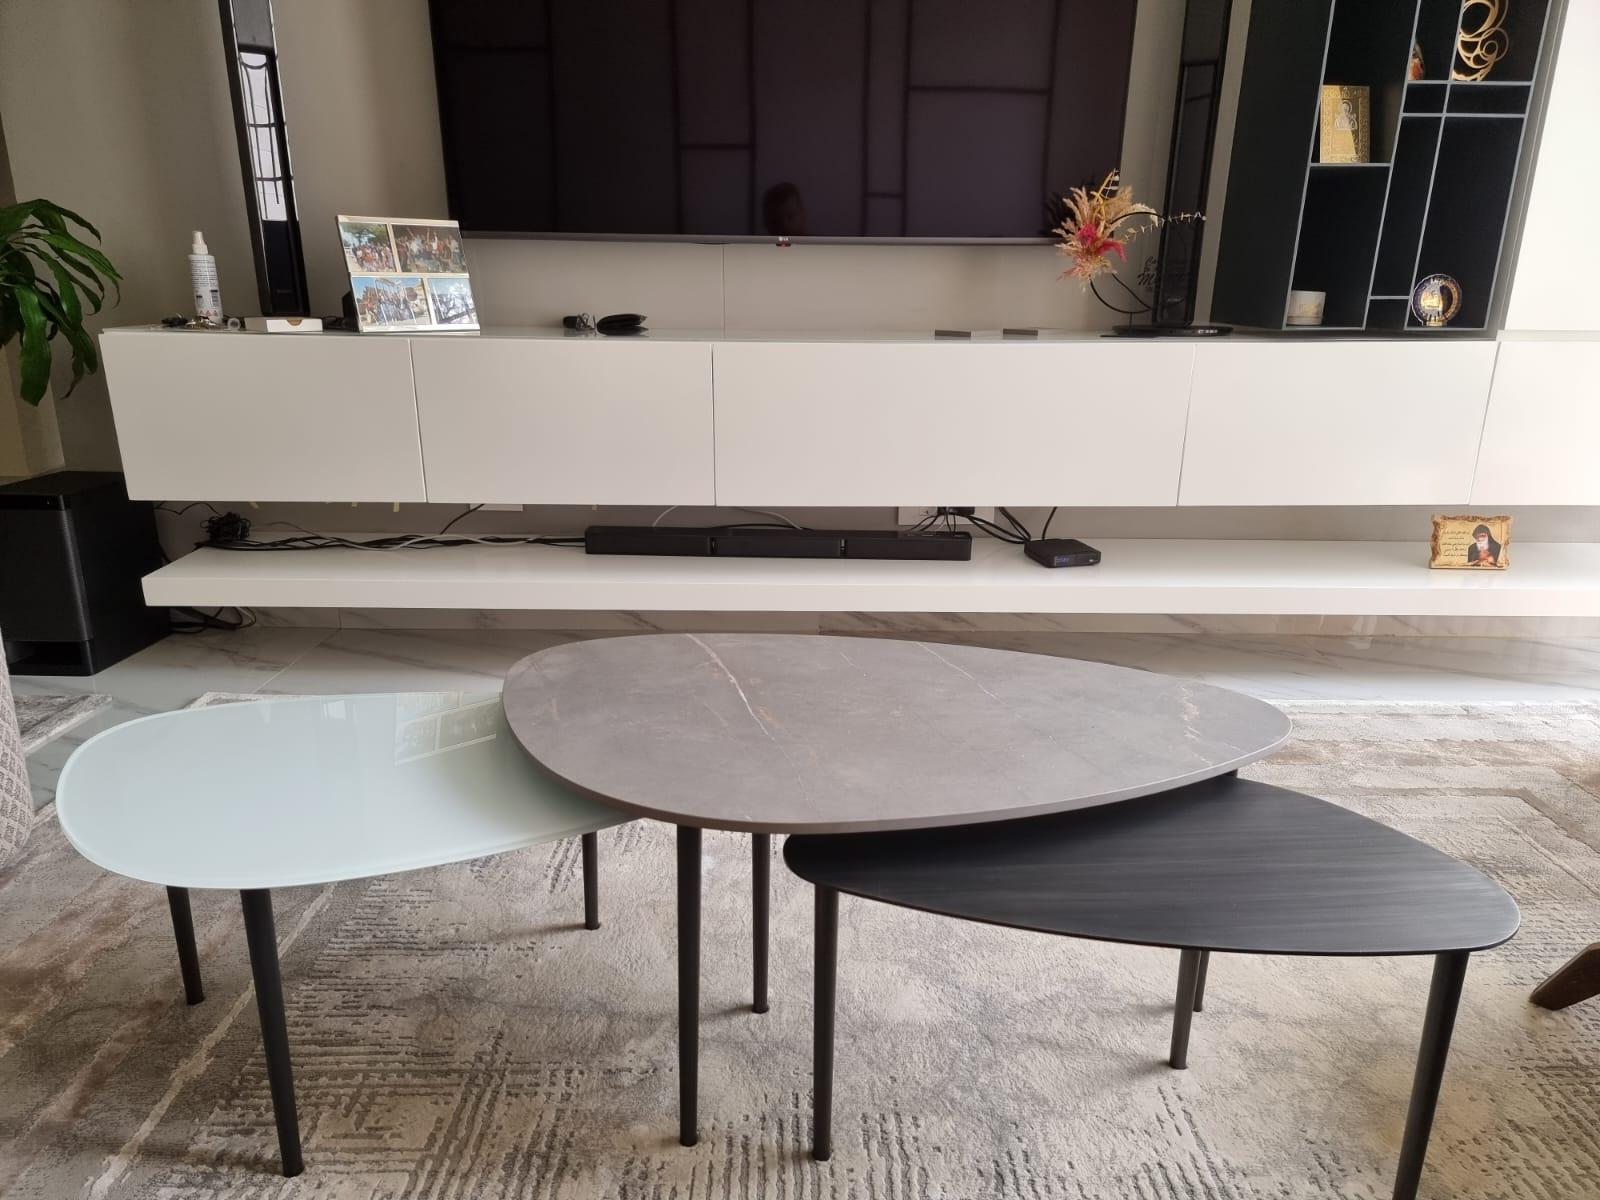 Set of 3 coffee tables that have the same top shapes and legs but in different sizes, varied heights and several materials of the tops. The 3 tops vary between back-painted glass, grey ceramic and brushed gun metal. 
The tops have asymmetrical oval